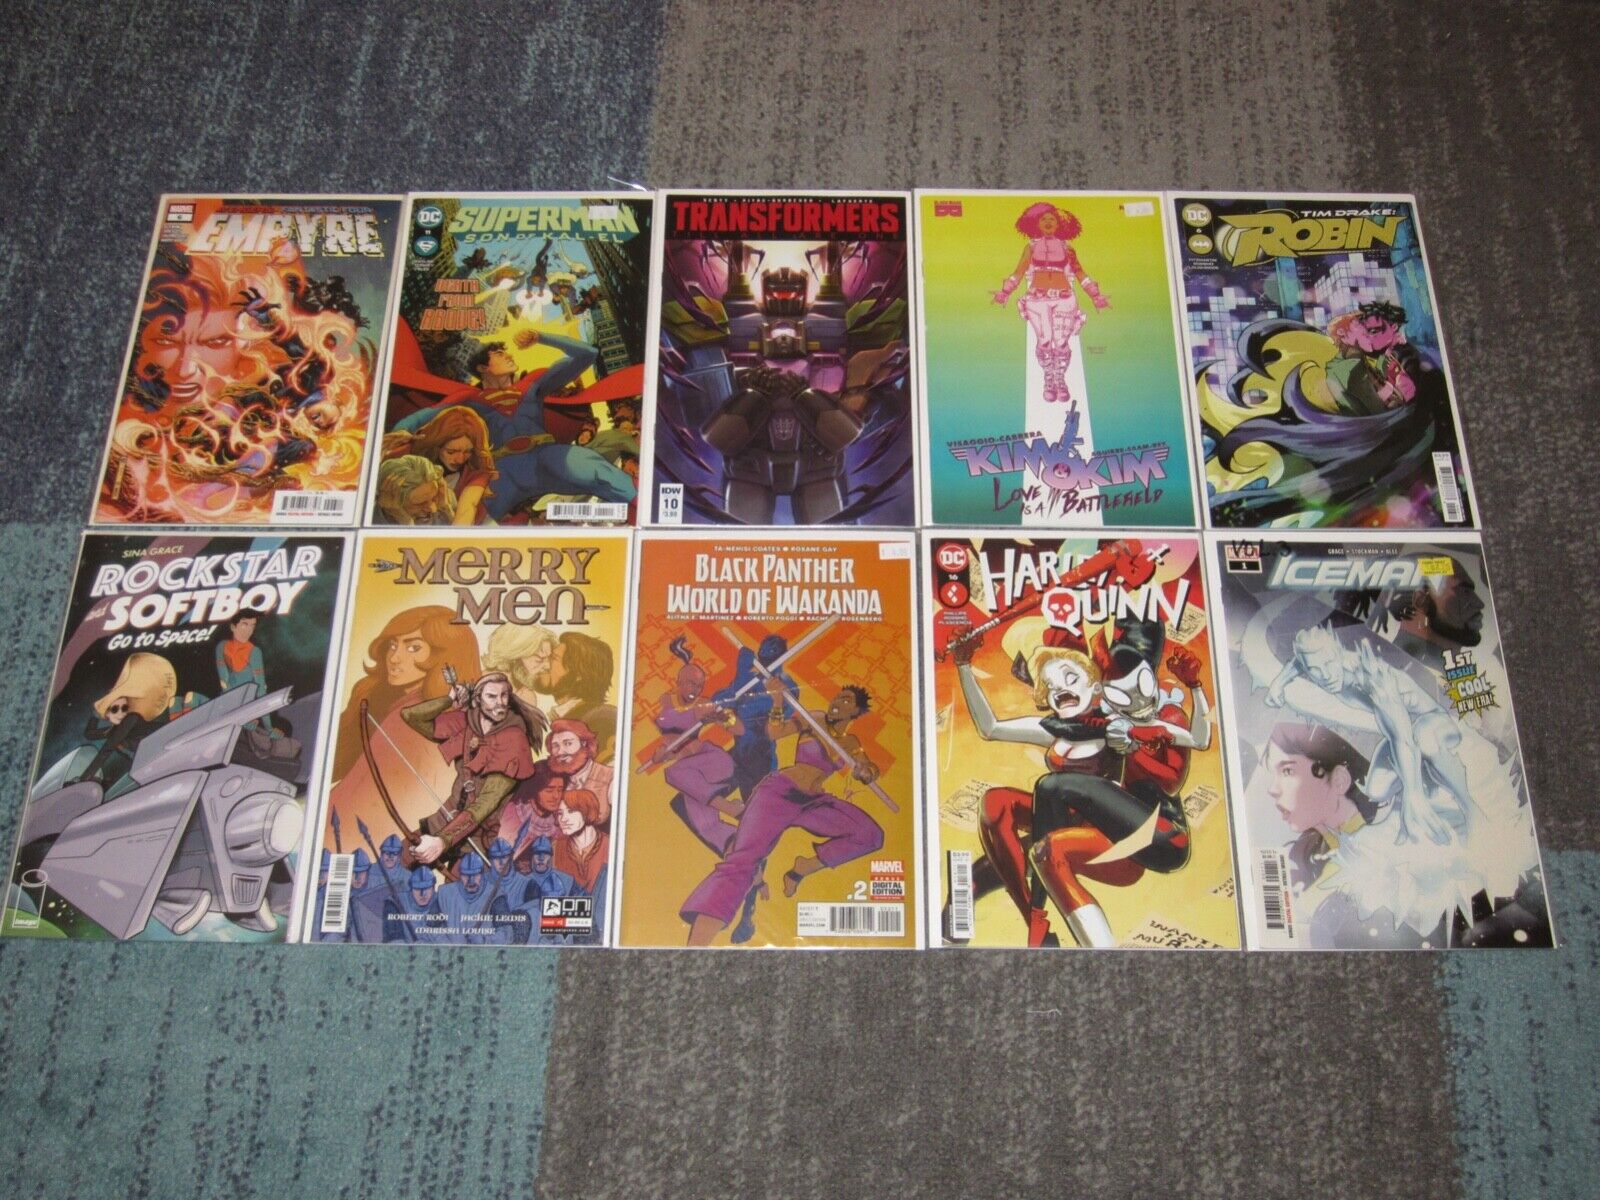 LOT OF 20 COMIC BOOKS WITH LGBTQA (GAY LESBIAN NON BINARY) CHARACTERS VF+ #PRIDE